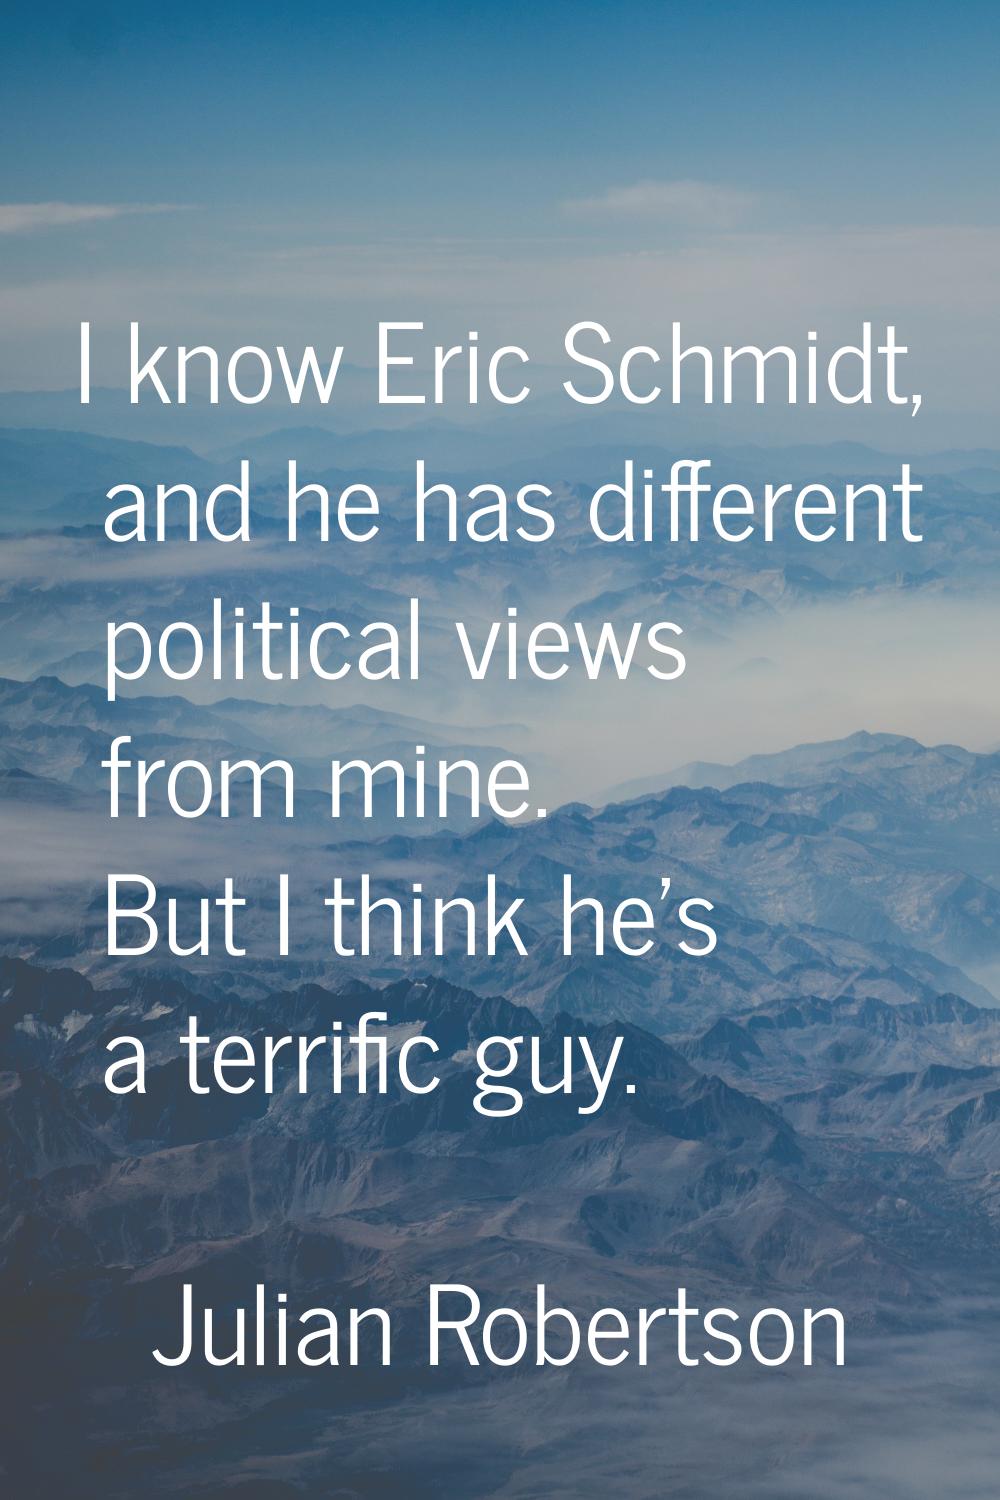 I know Eric Schmidt, and he has different political views from mine. But I think he's a terrific gu